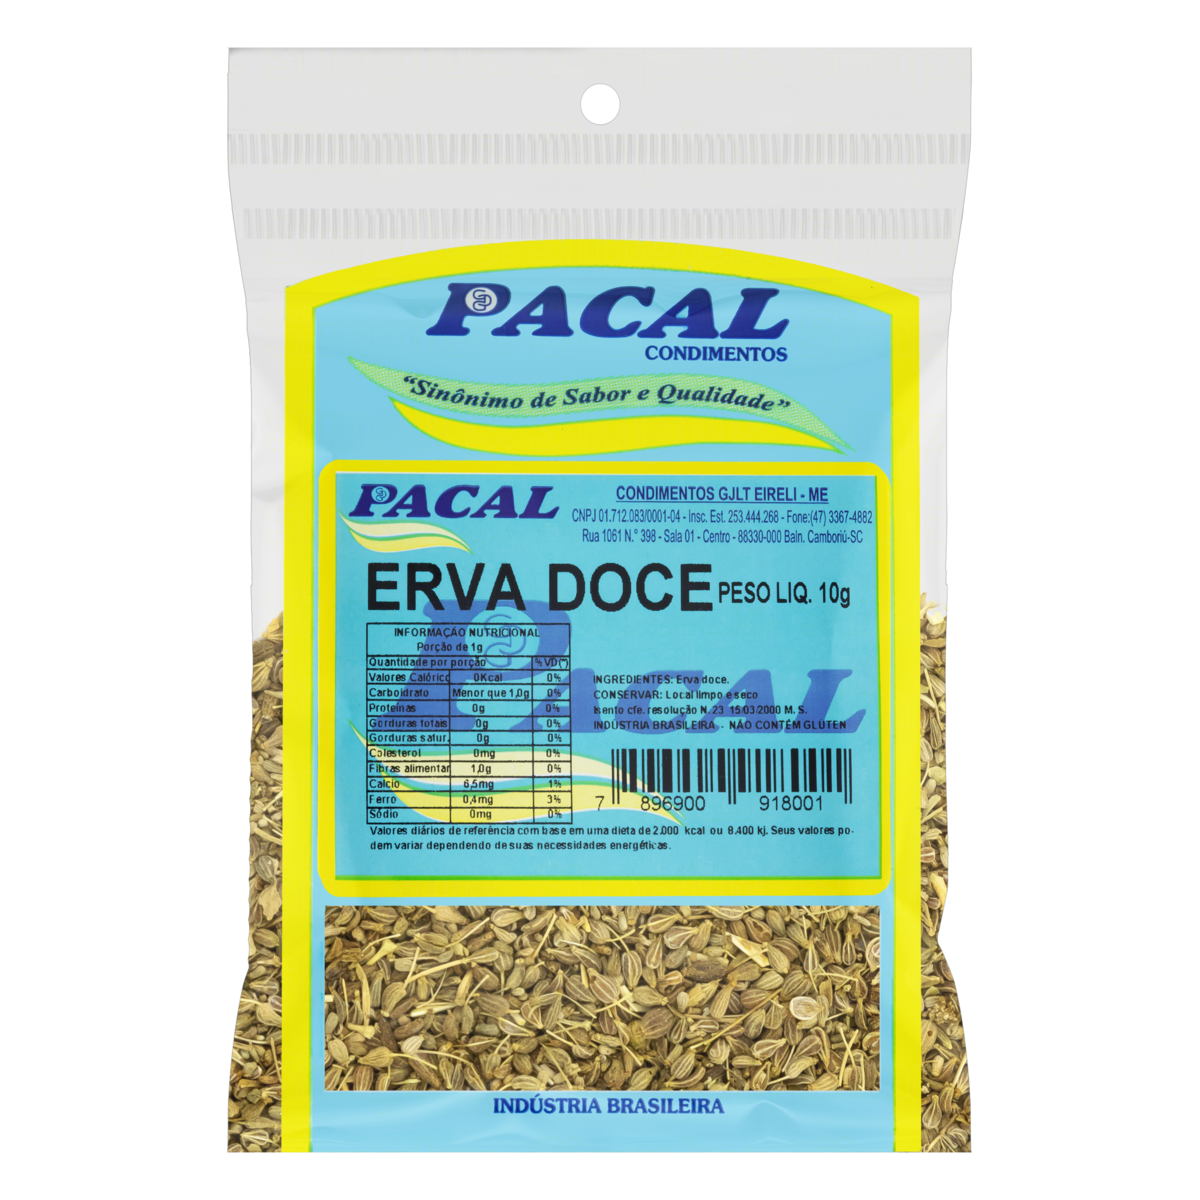 7896900918001 - ERVA-DOCE PACAL PACOTE 10G